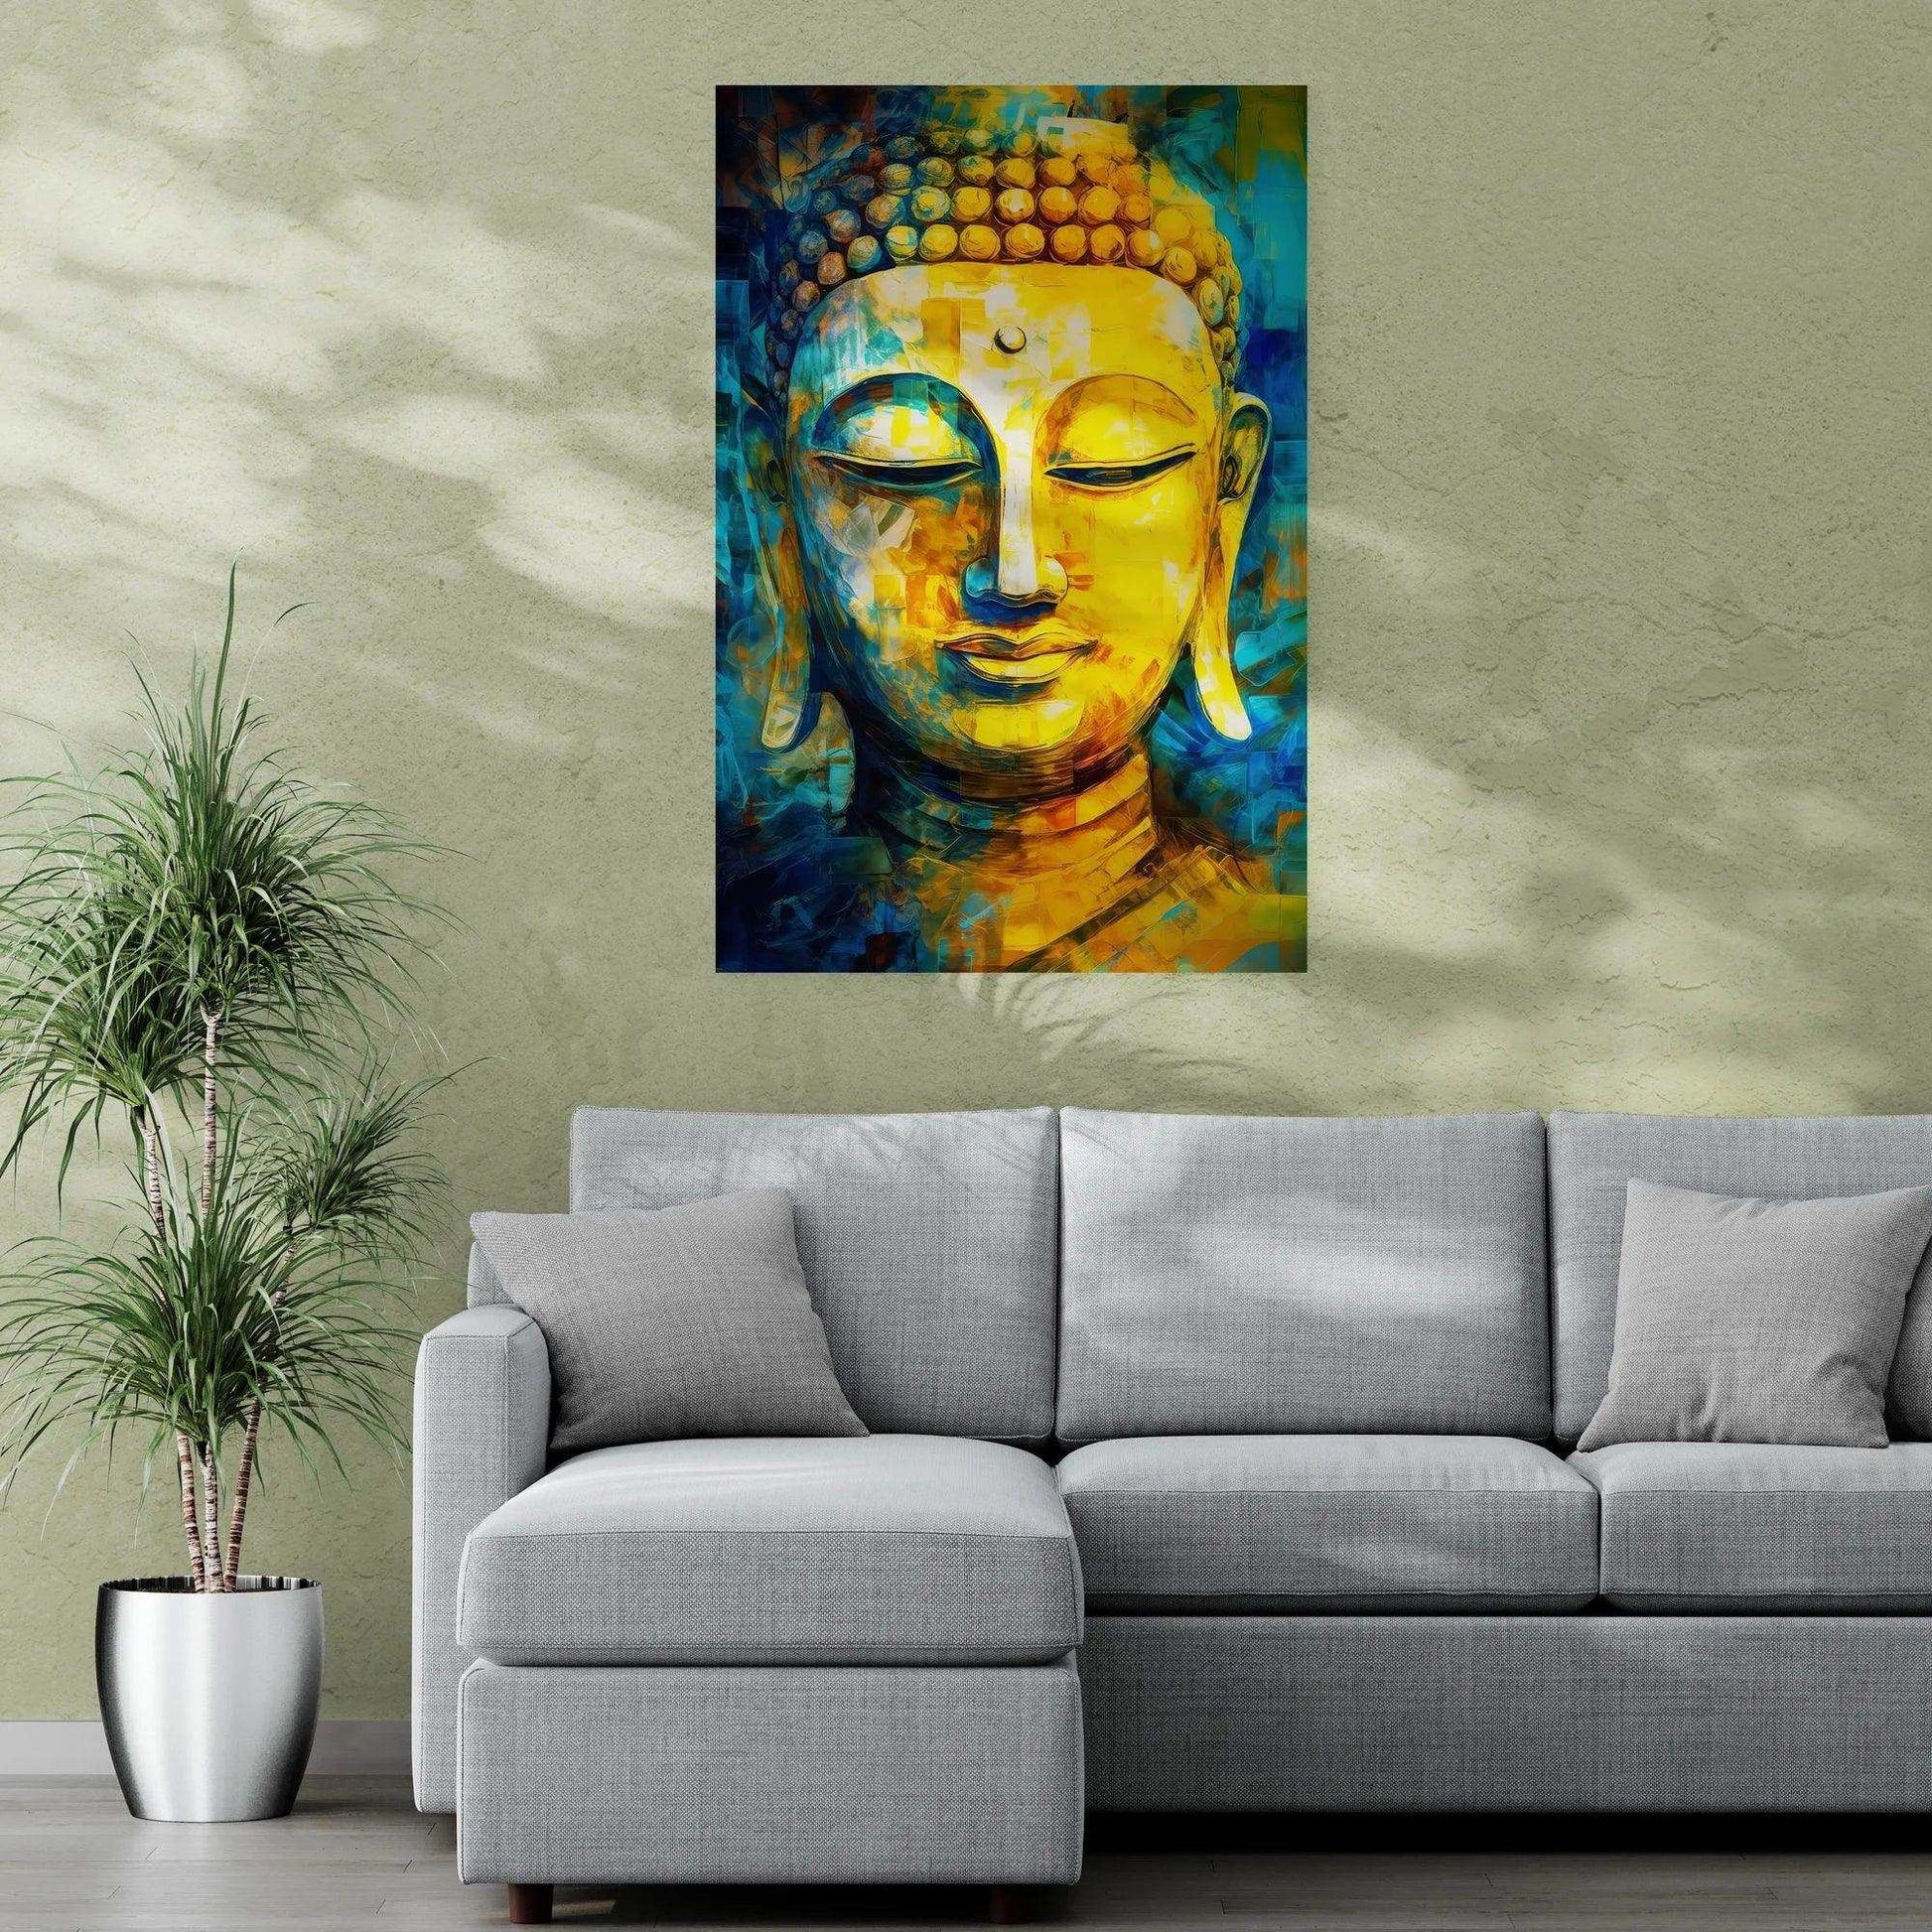 A vibrant Buddha painting in bold yellow and blue tones hangs on a textured yellow wall, complementing the lush green potted plant beside a modern grey sectional sofa, contributing a serene and contemplative ambiance to the living space.